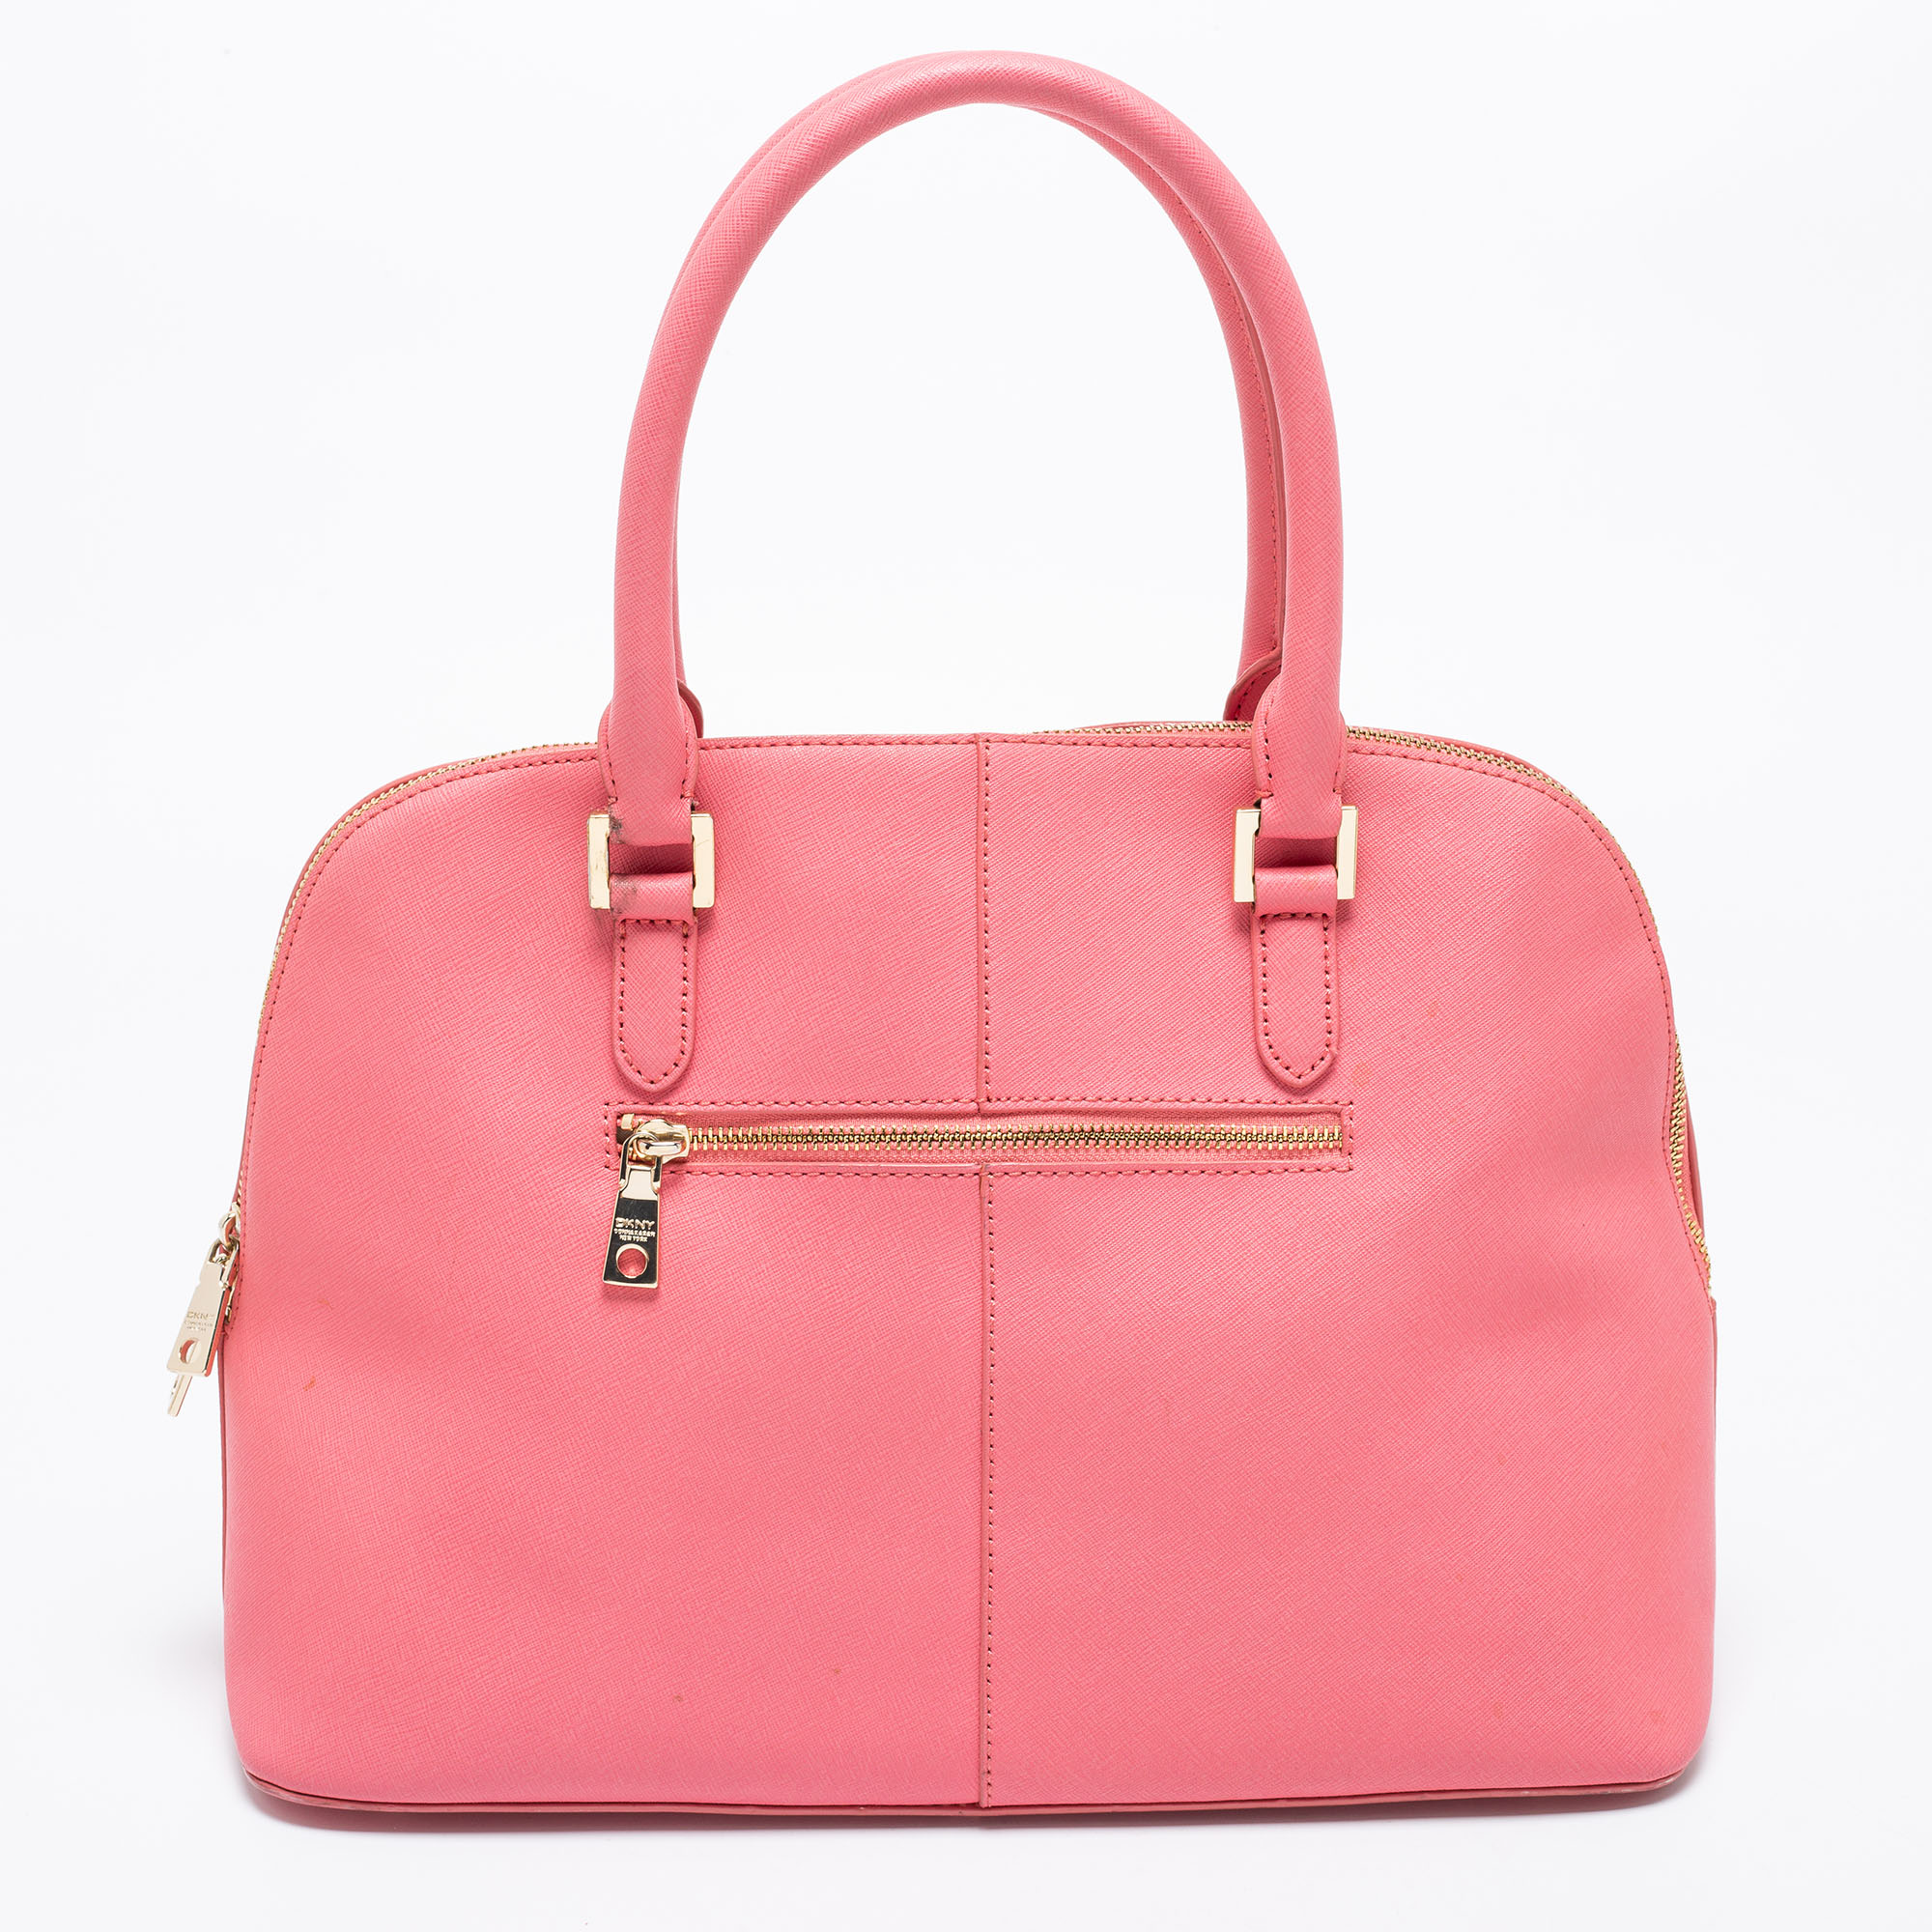 DKNY Pink Leather Dome Satchel